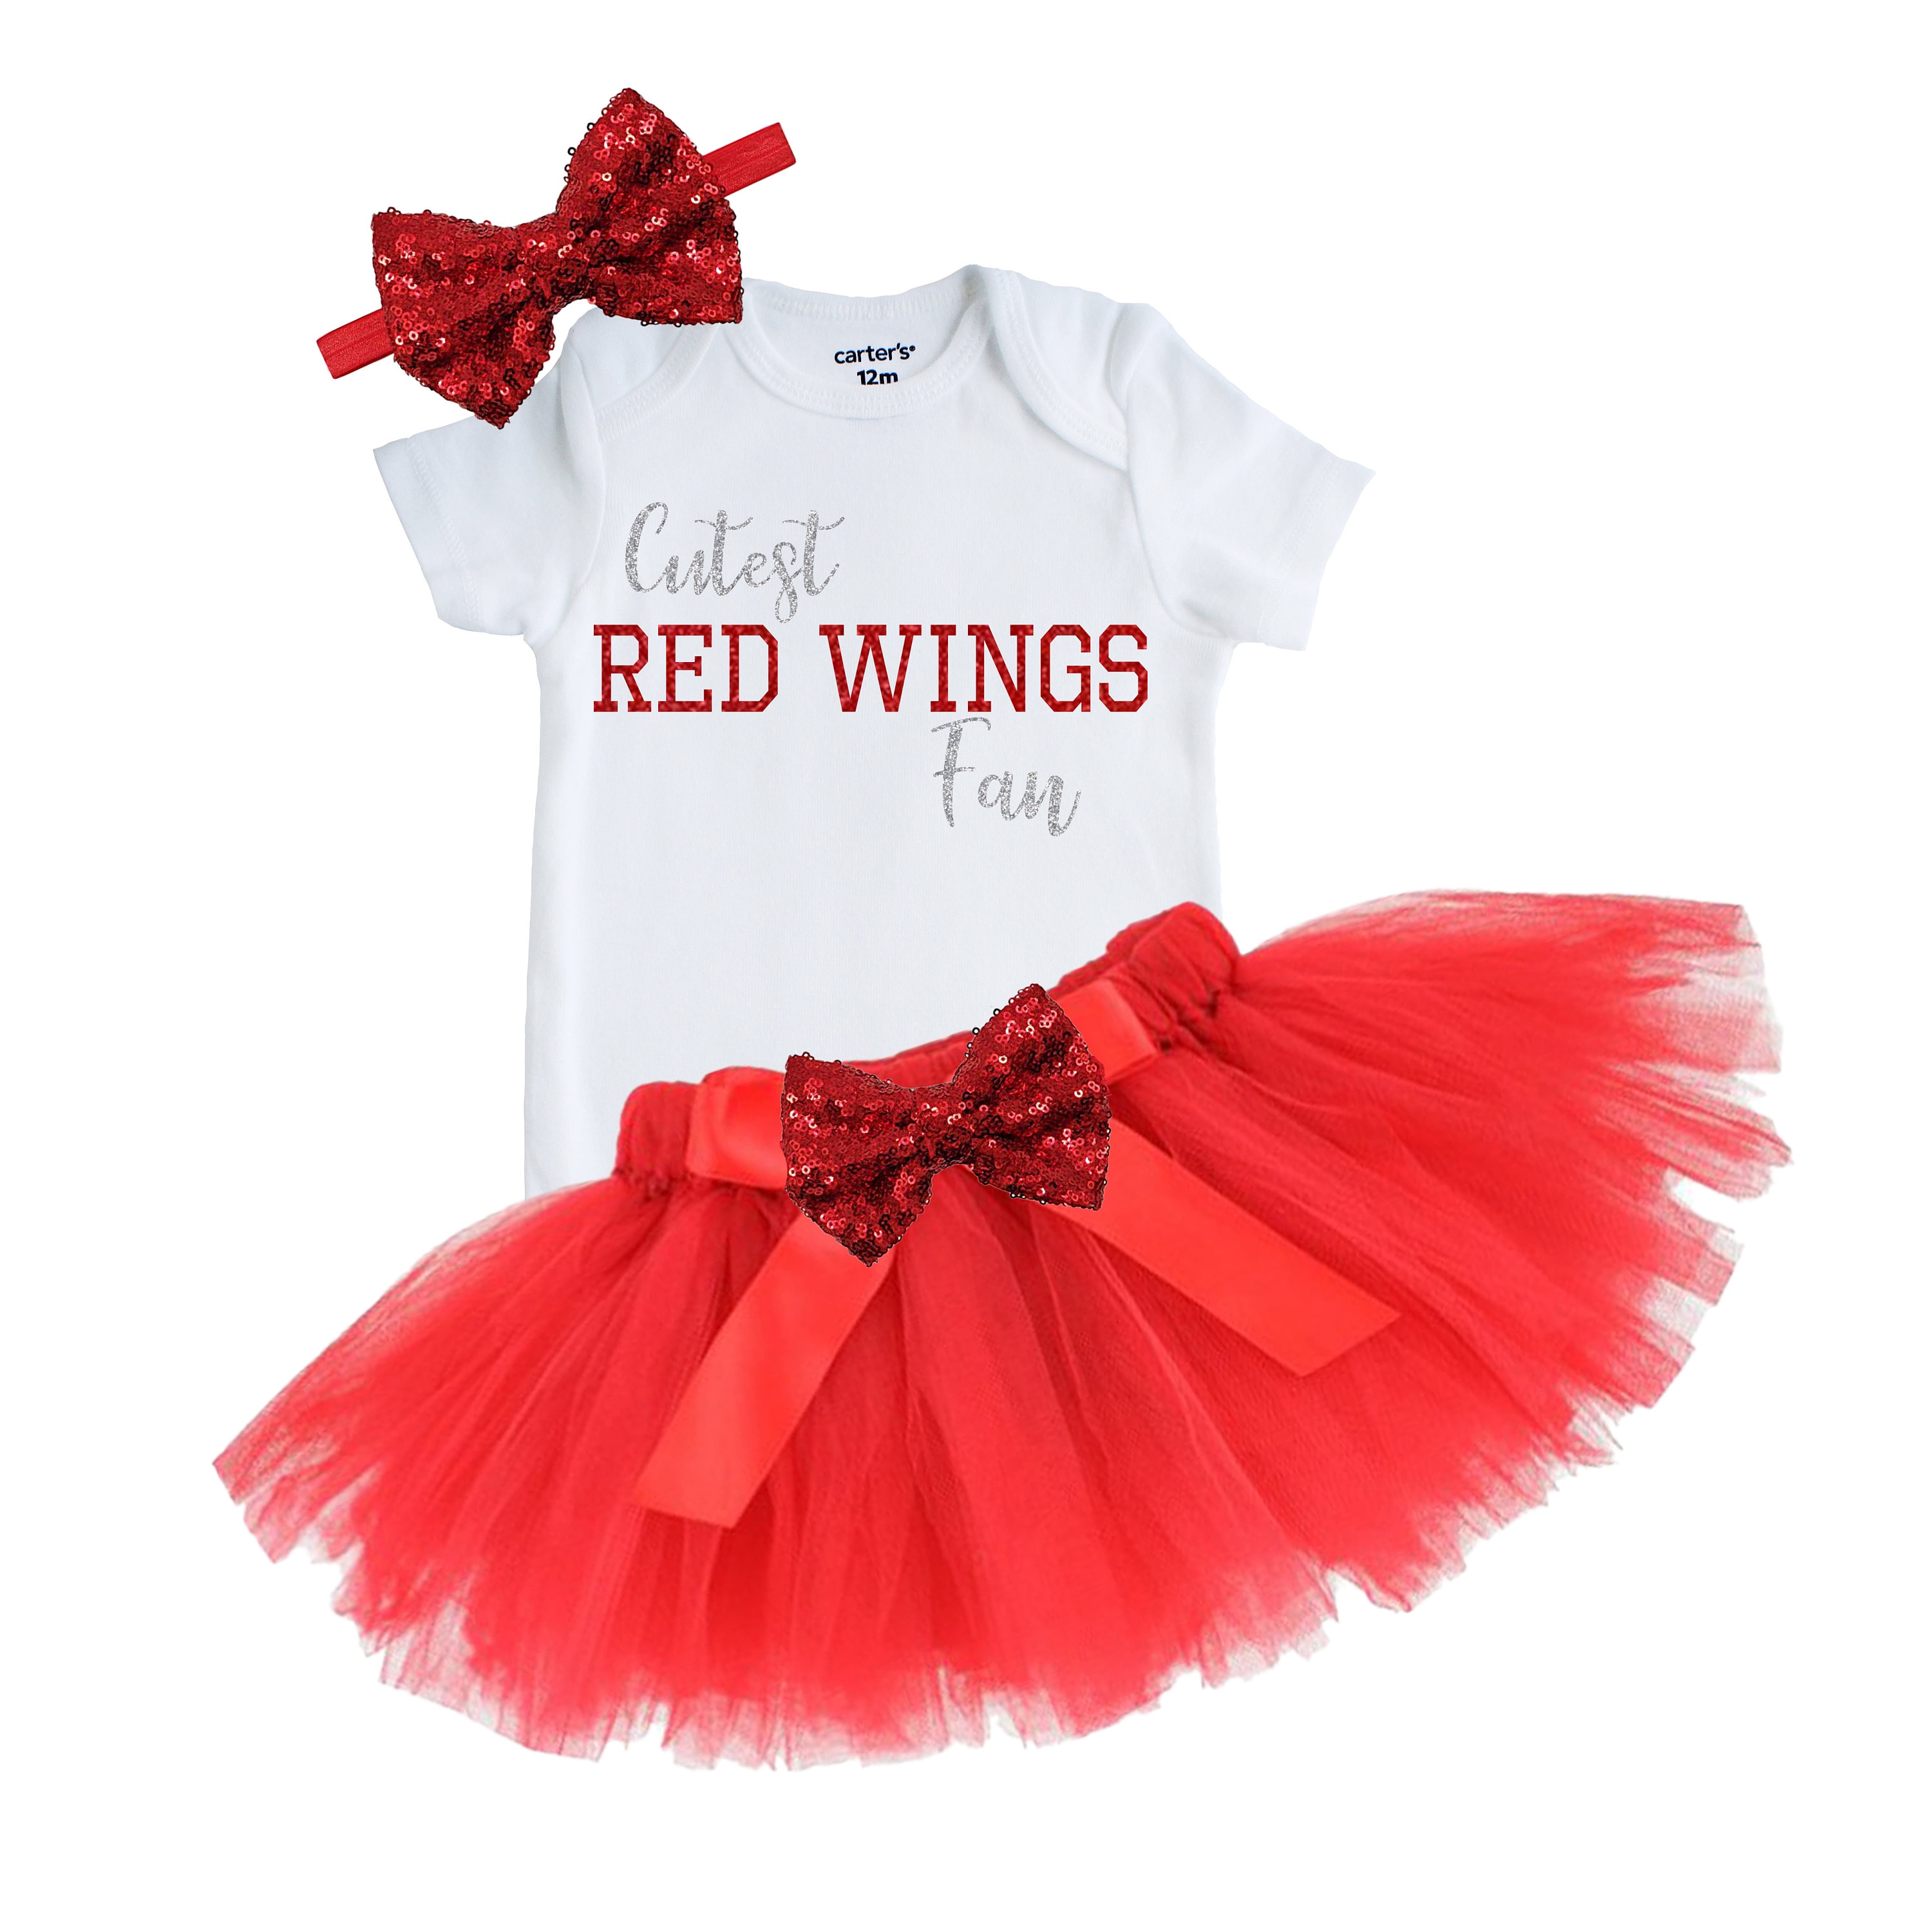 red wings baby jersey